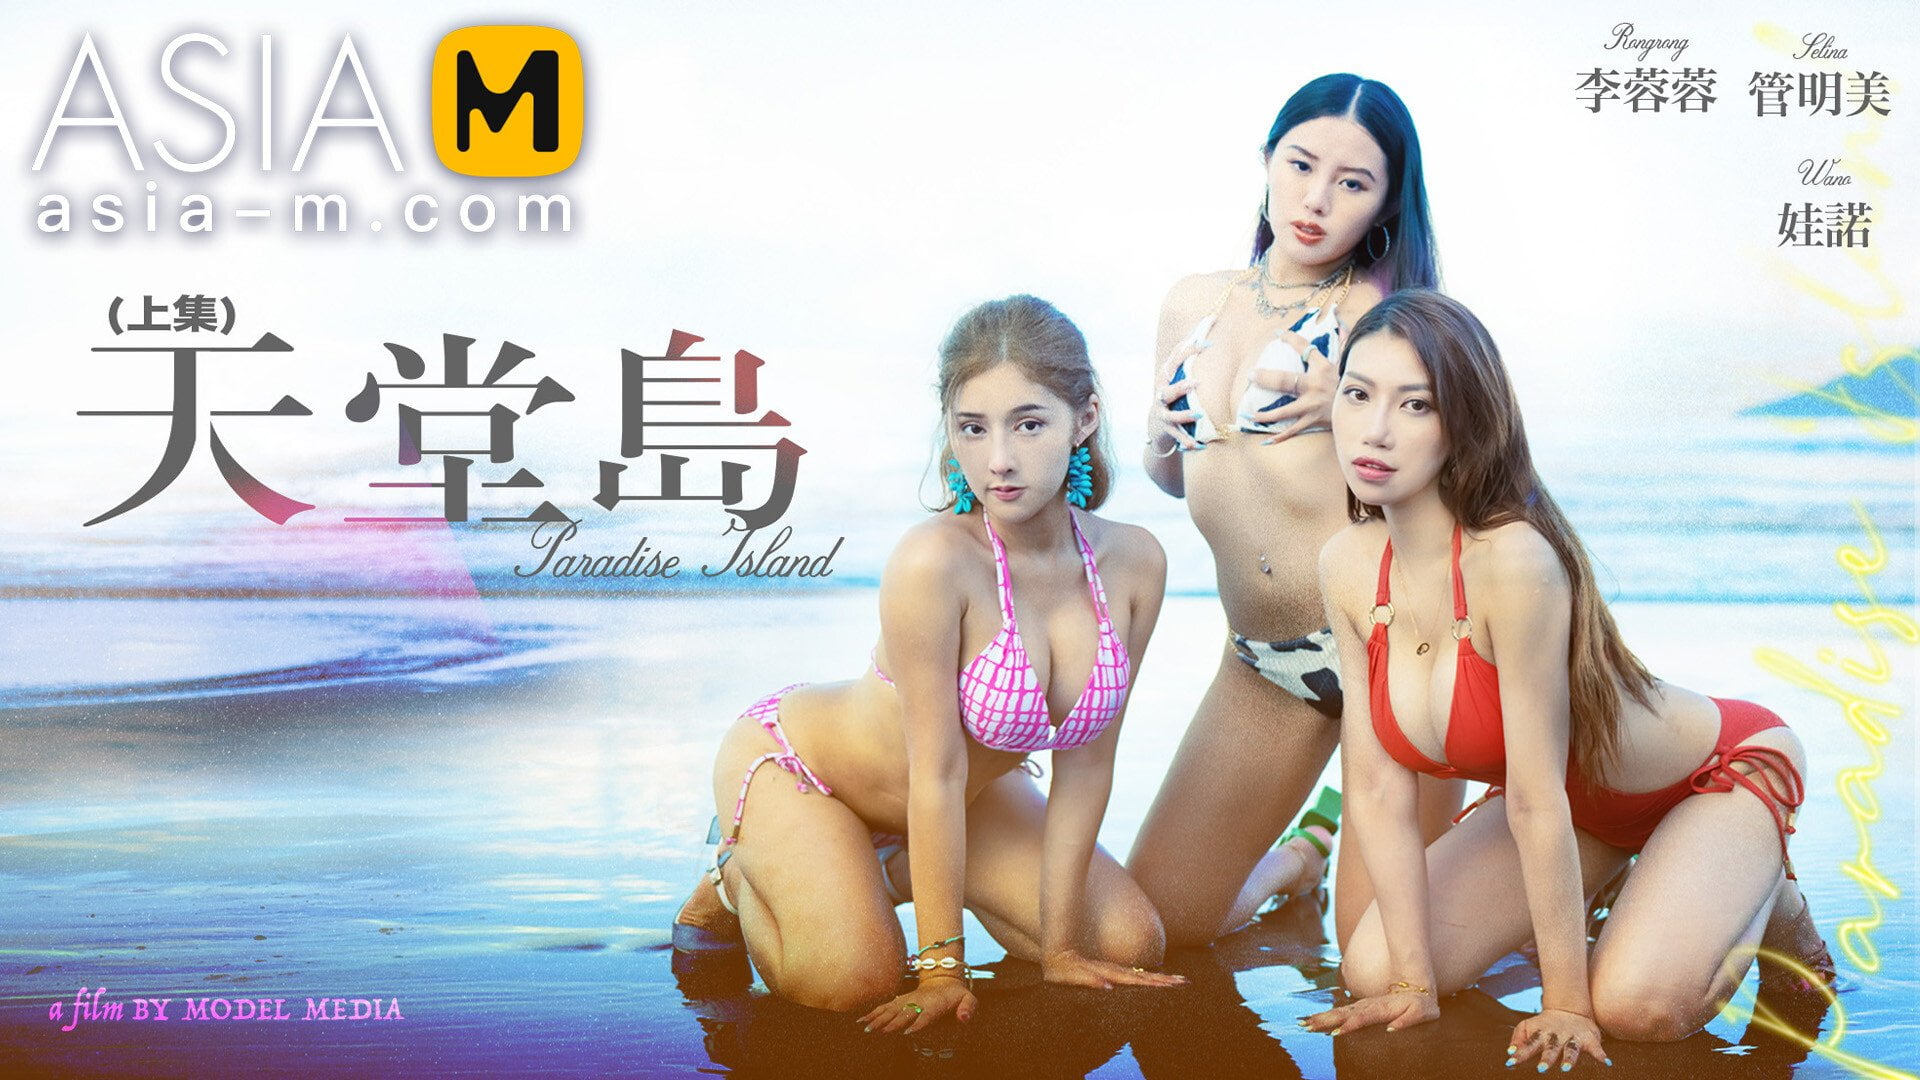 Asia-M &#8211; Wa Nuo, Li Rong Rong And Guan Ming Mei &#8211; Paradise Island MDL-0007-1 / 天堂岛-上集 MDL-0007-1